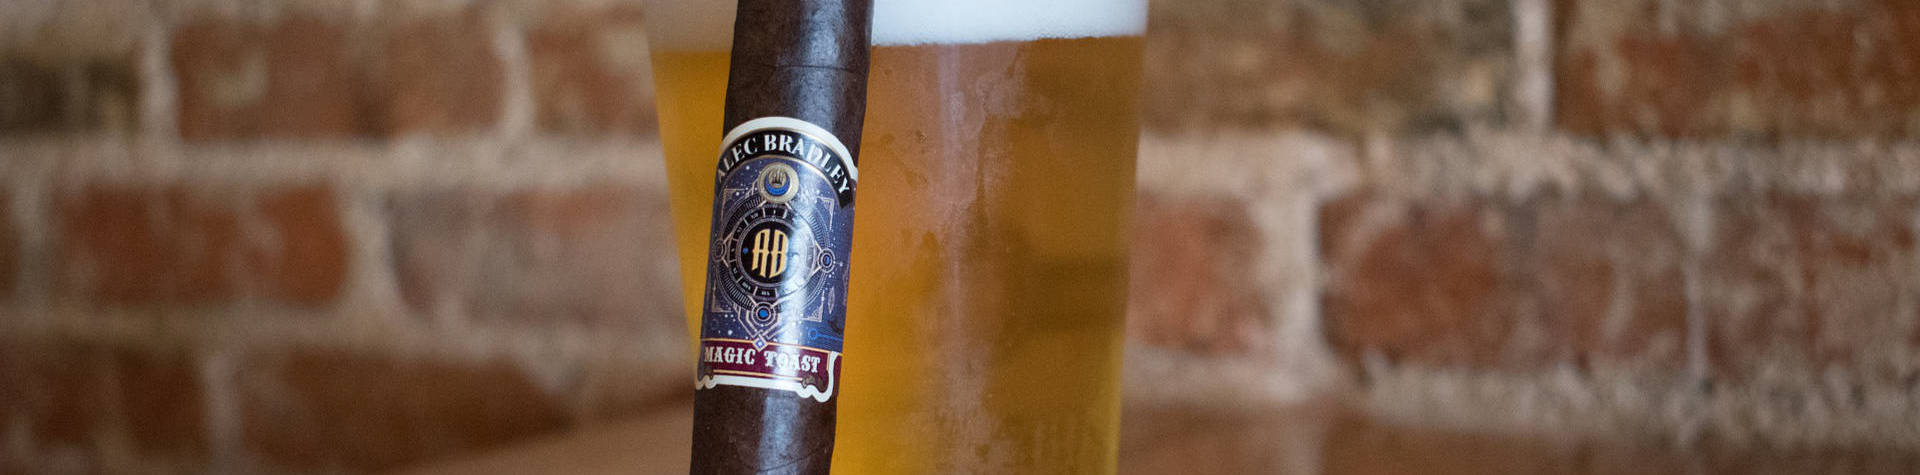 From the affordable Spirit of Cuba to the more impressive Presnado, we’ve got all the Alec Bradley cigars you can smoke!